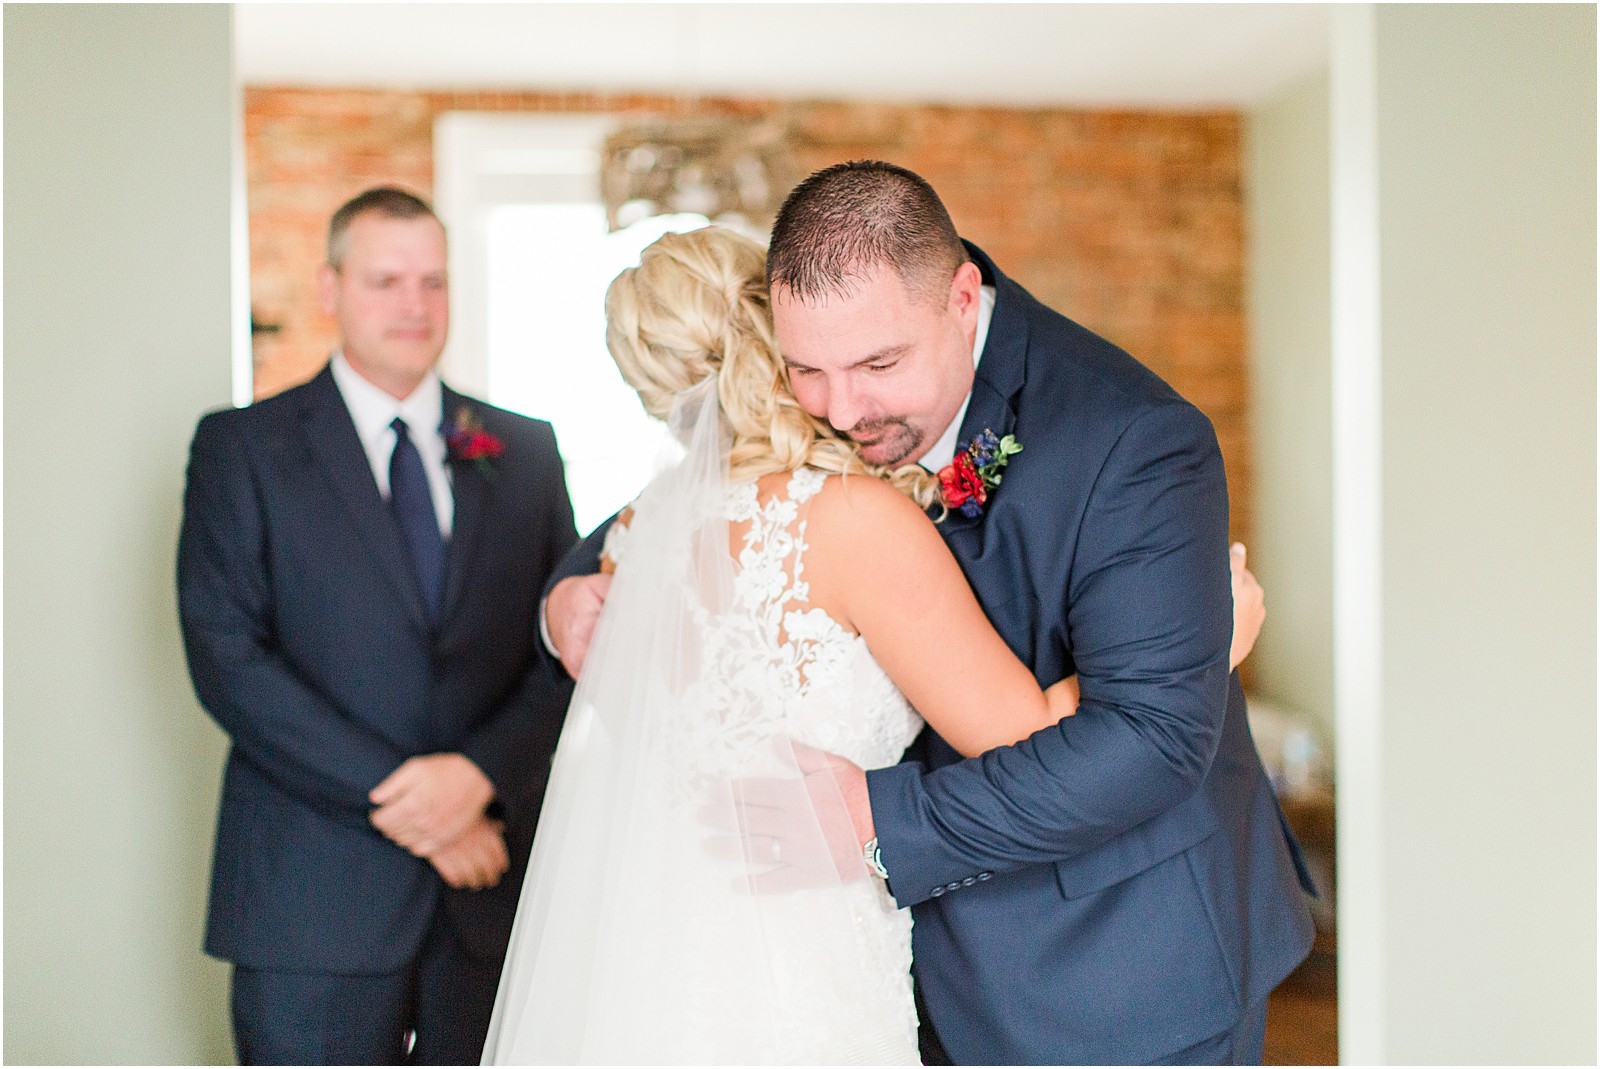 Haylee and Dillon's Evansville, Indiana wedding by Bret and Brandie Photography.0028.jpg